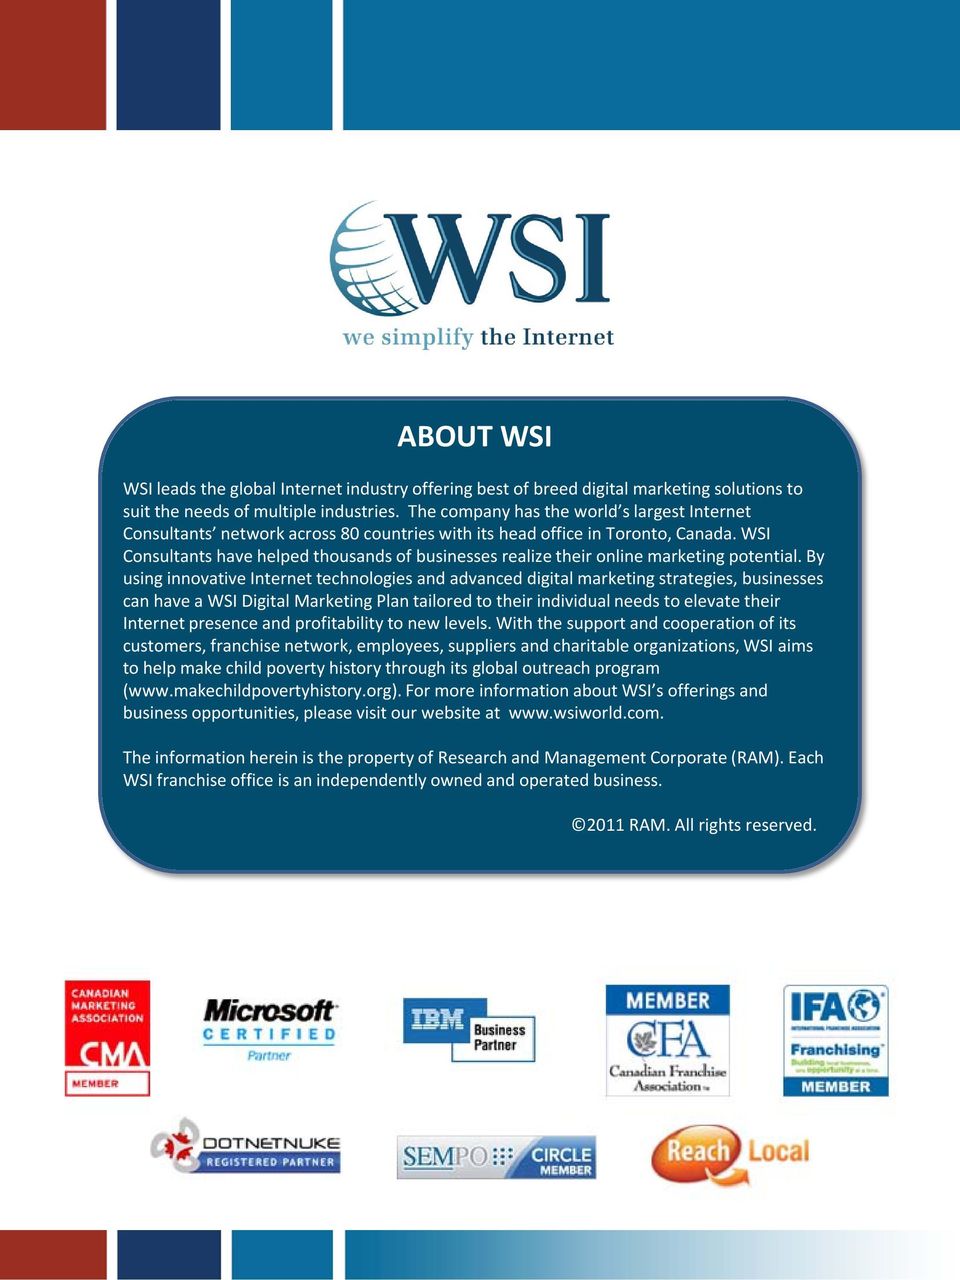 WSI Consultants have helped thousands of businesses realize their online marketing potential.